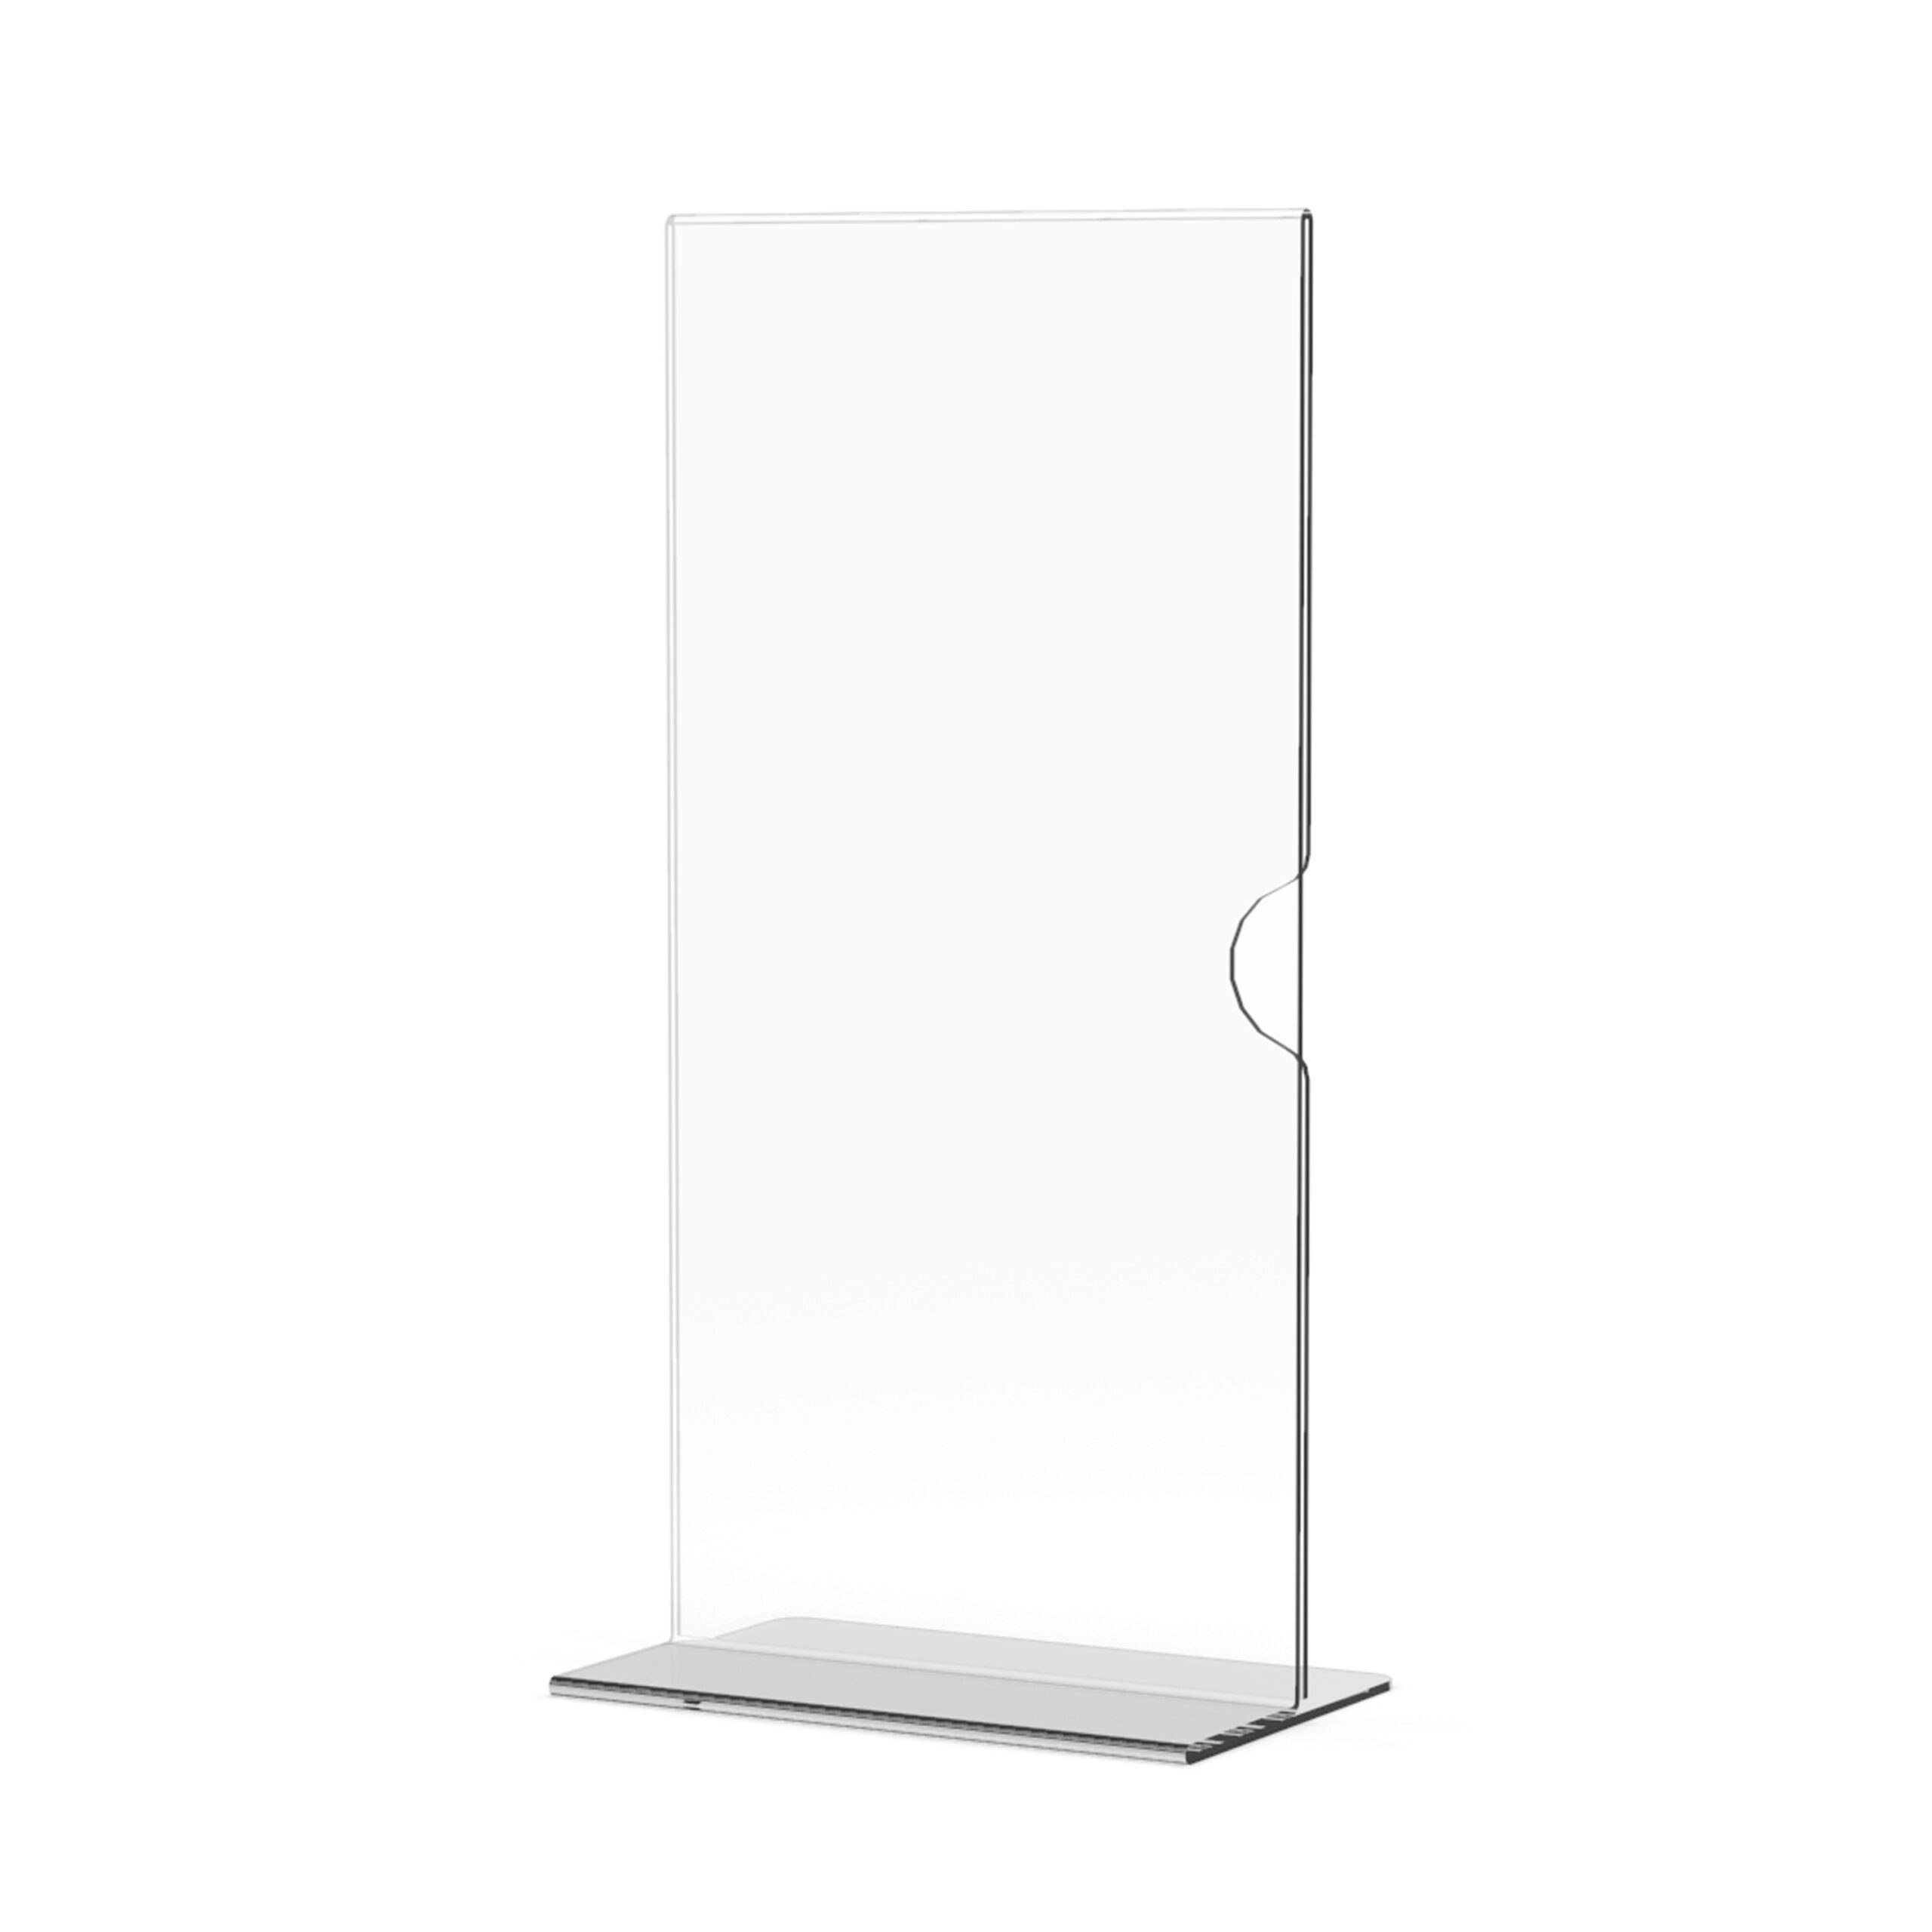 PARROT ACRYLIC
MENU HOLDER
DOUBLE SIDED 1/3
(DL) A4